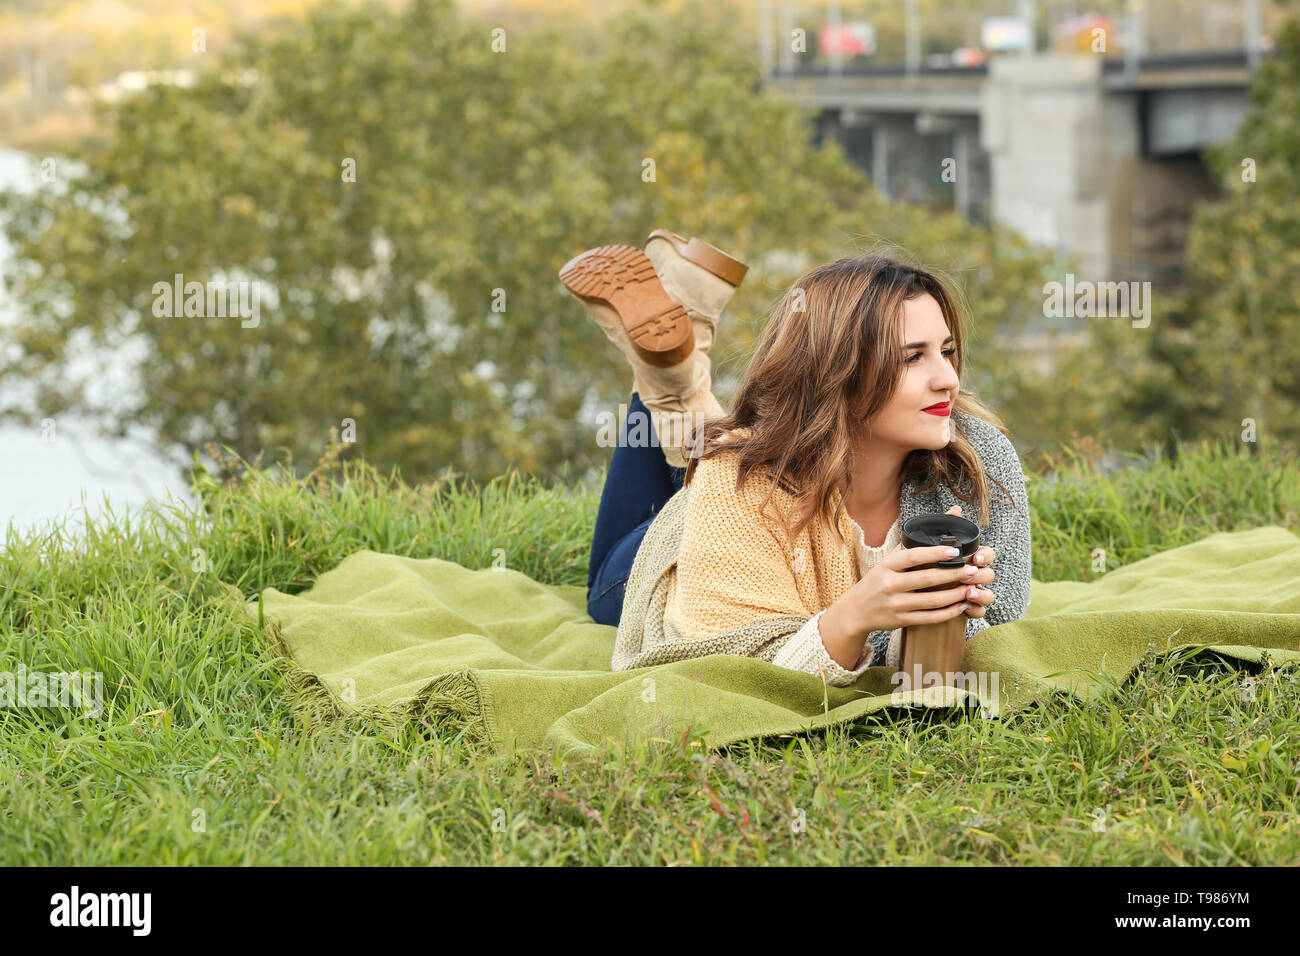 https://c8.alamy.com/comp/T986YM/beautiful-young-woman-with-thermos-resting-on-plaid-outdoors-T986YM.jpg